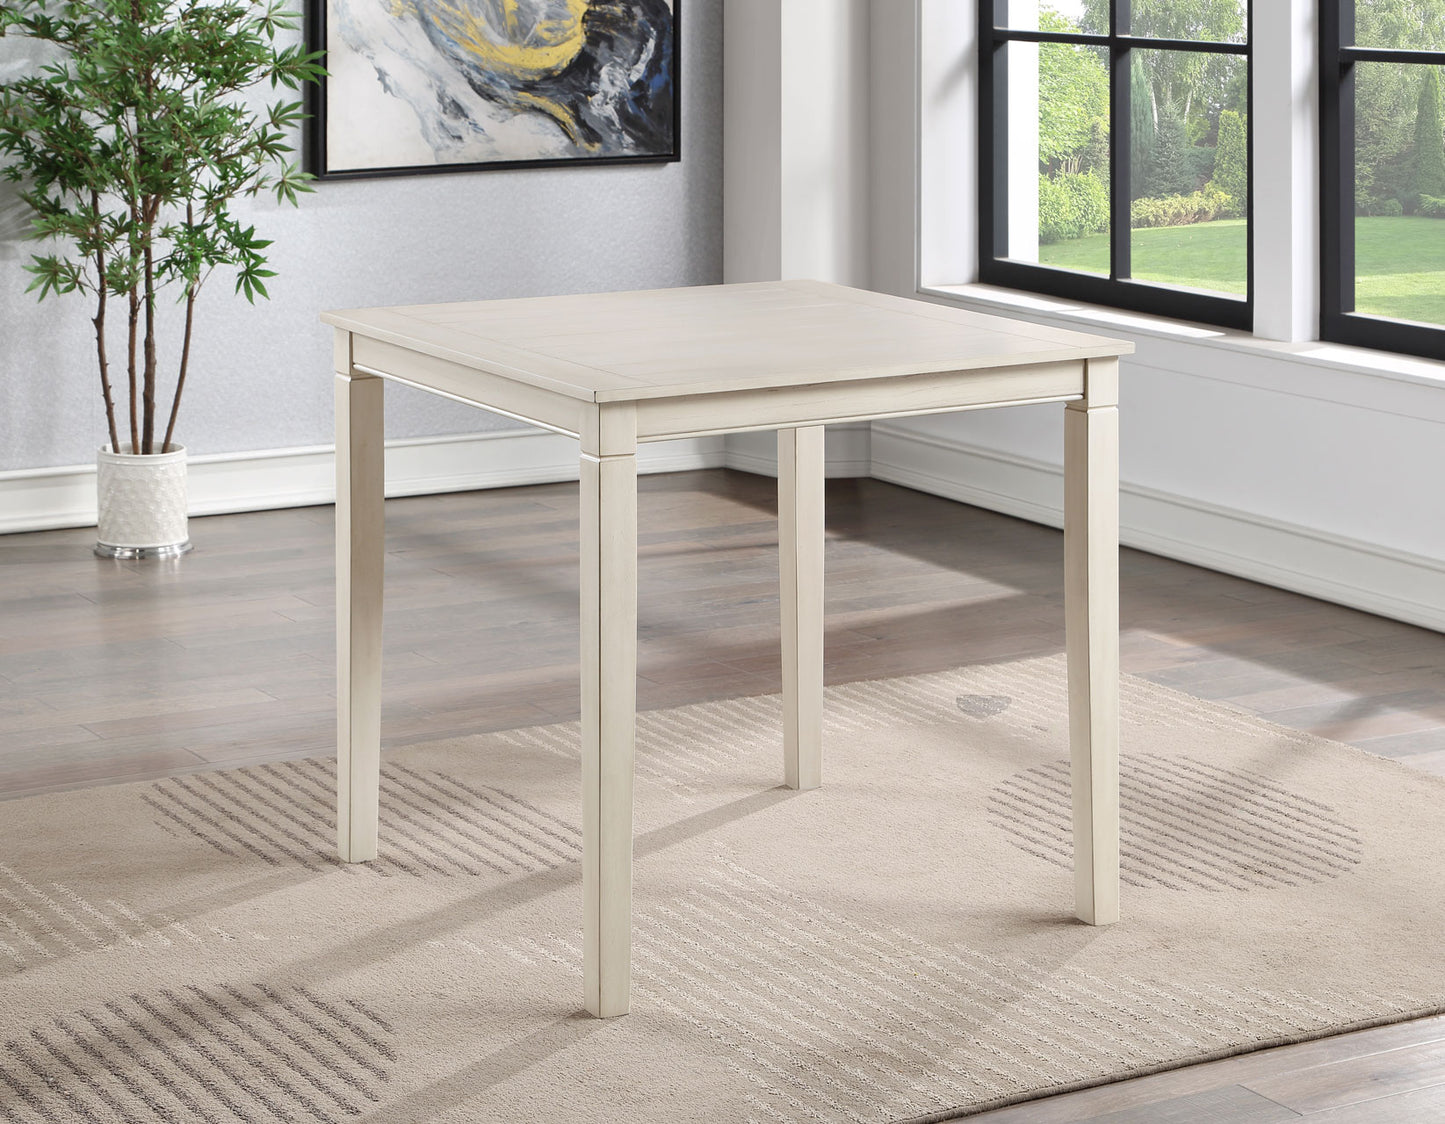 Westlake 5-Pack Counter Set
(Counter Table & 4 Counter Stools)